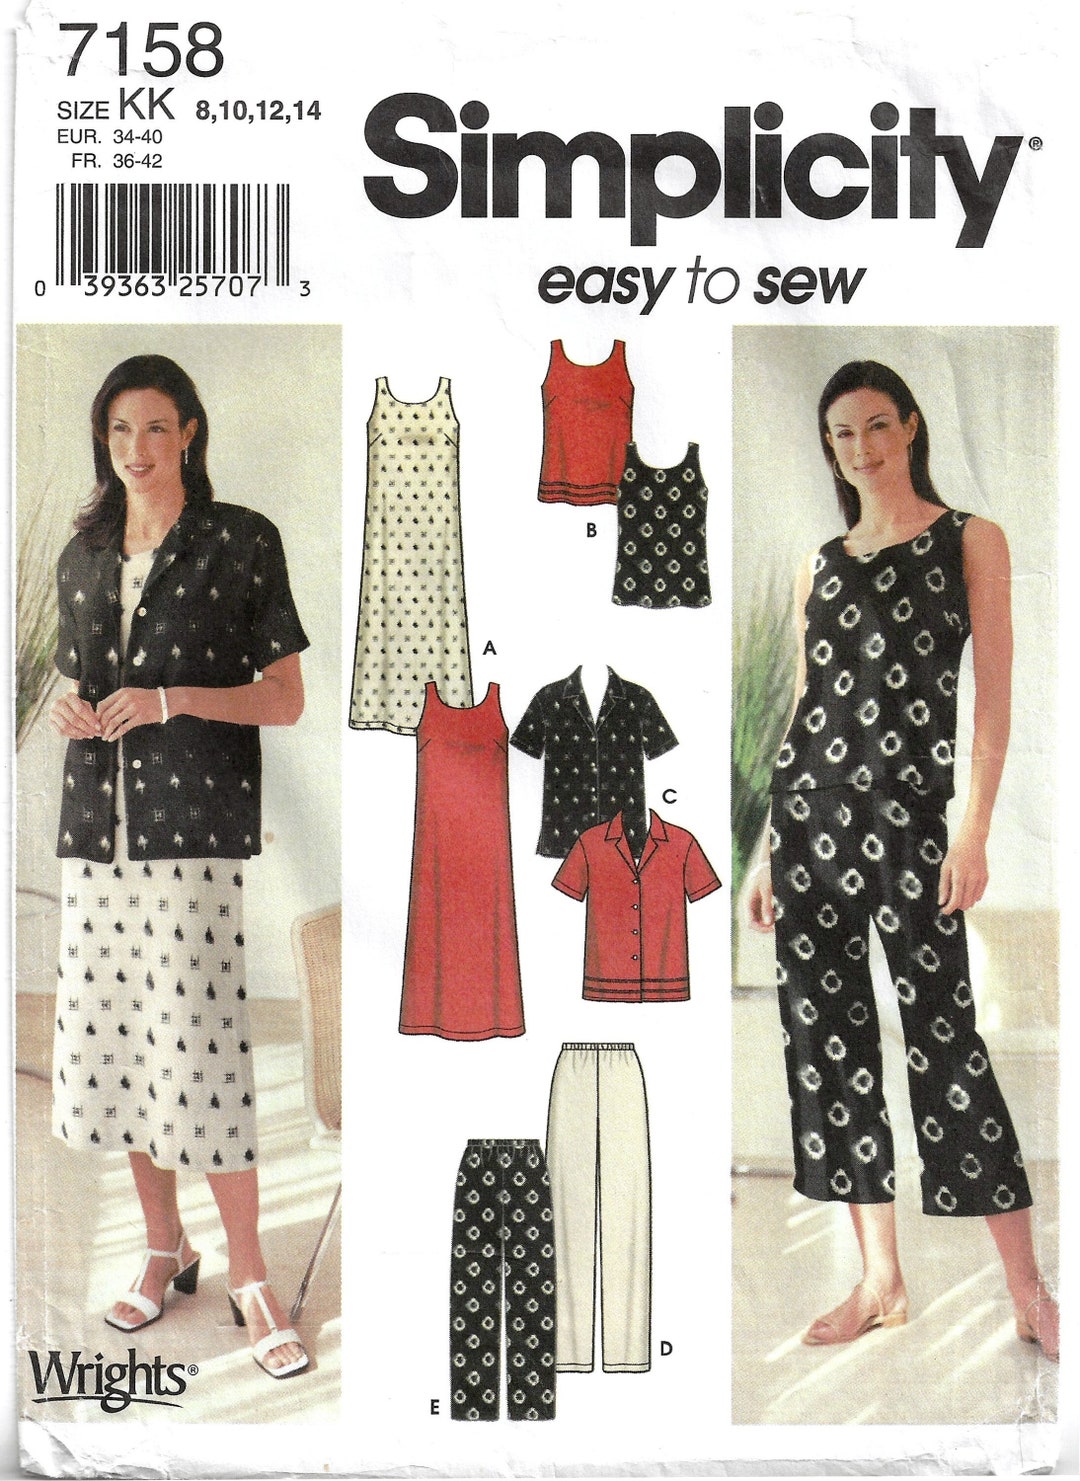 Simplicity 7158 Sewing Pattern Misses Easy to Sew Dress or Top Shirt ...